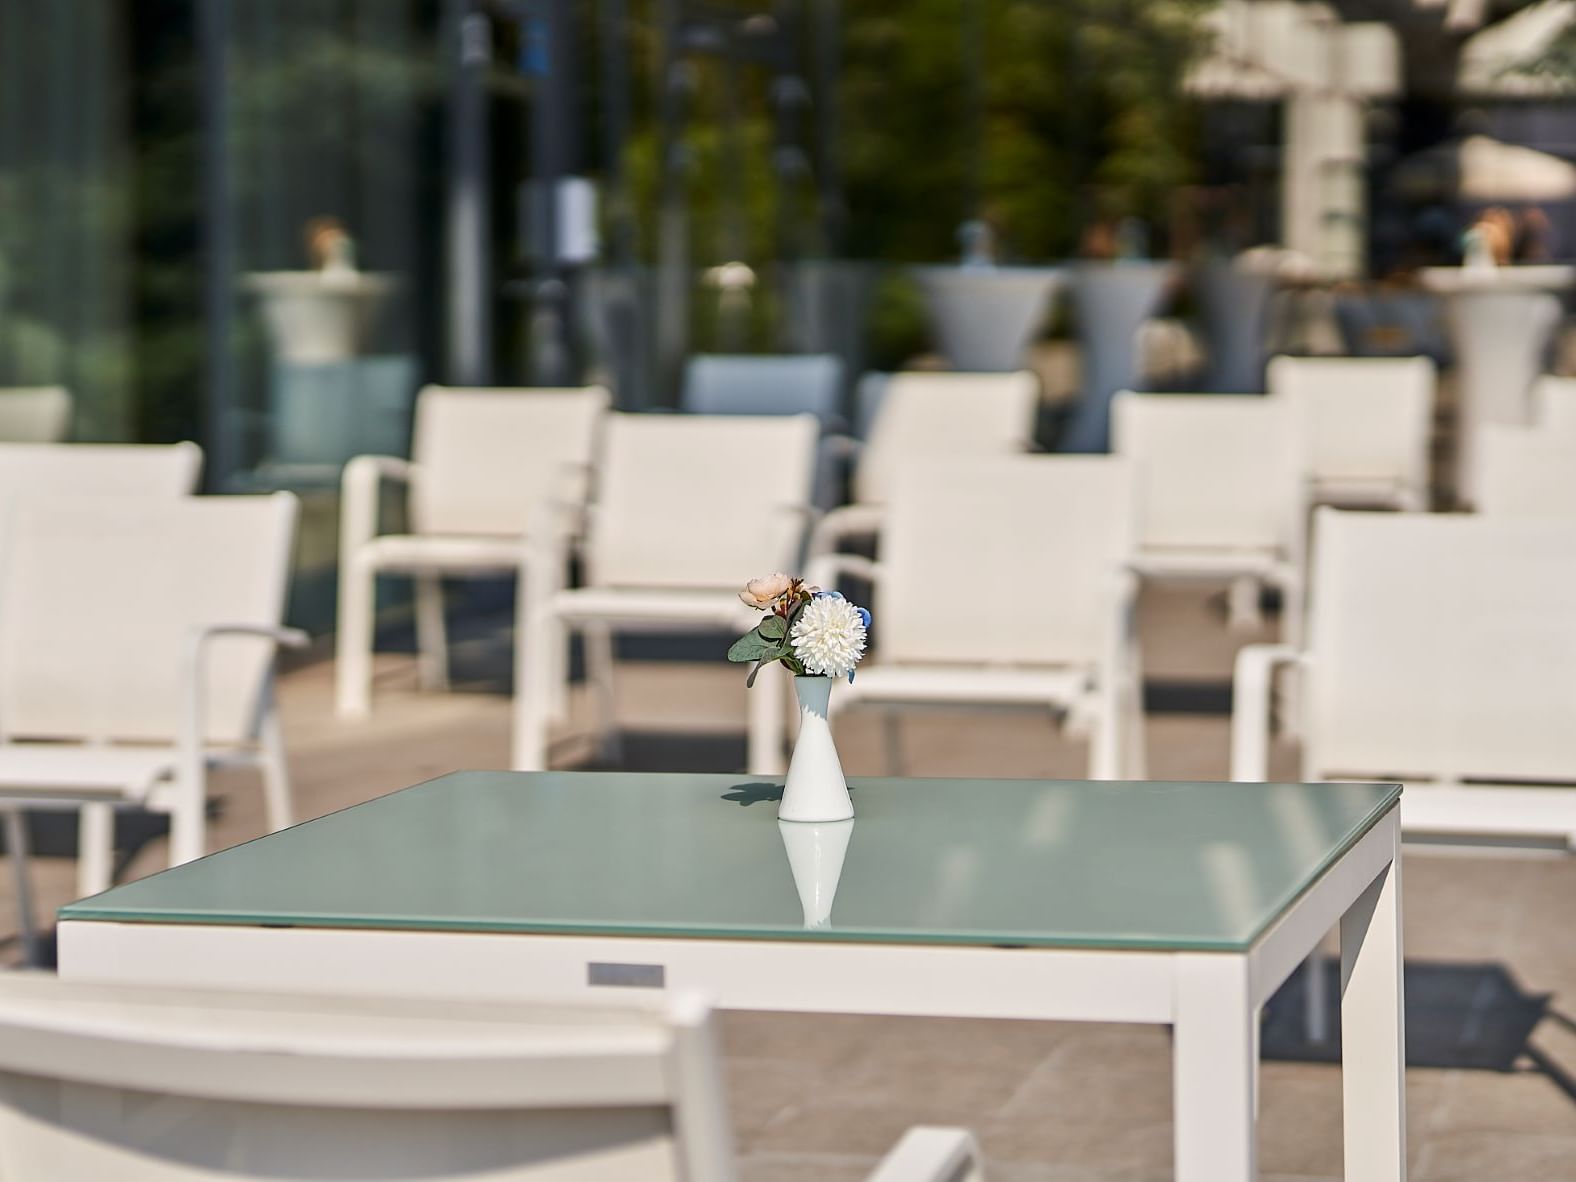 An Outdoor meeting area in Mercury at Ana Hotels Europa